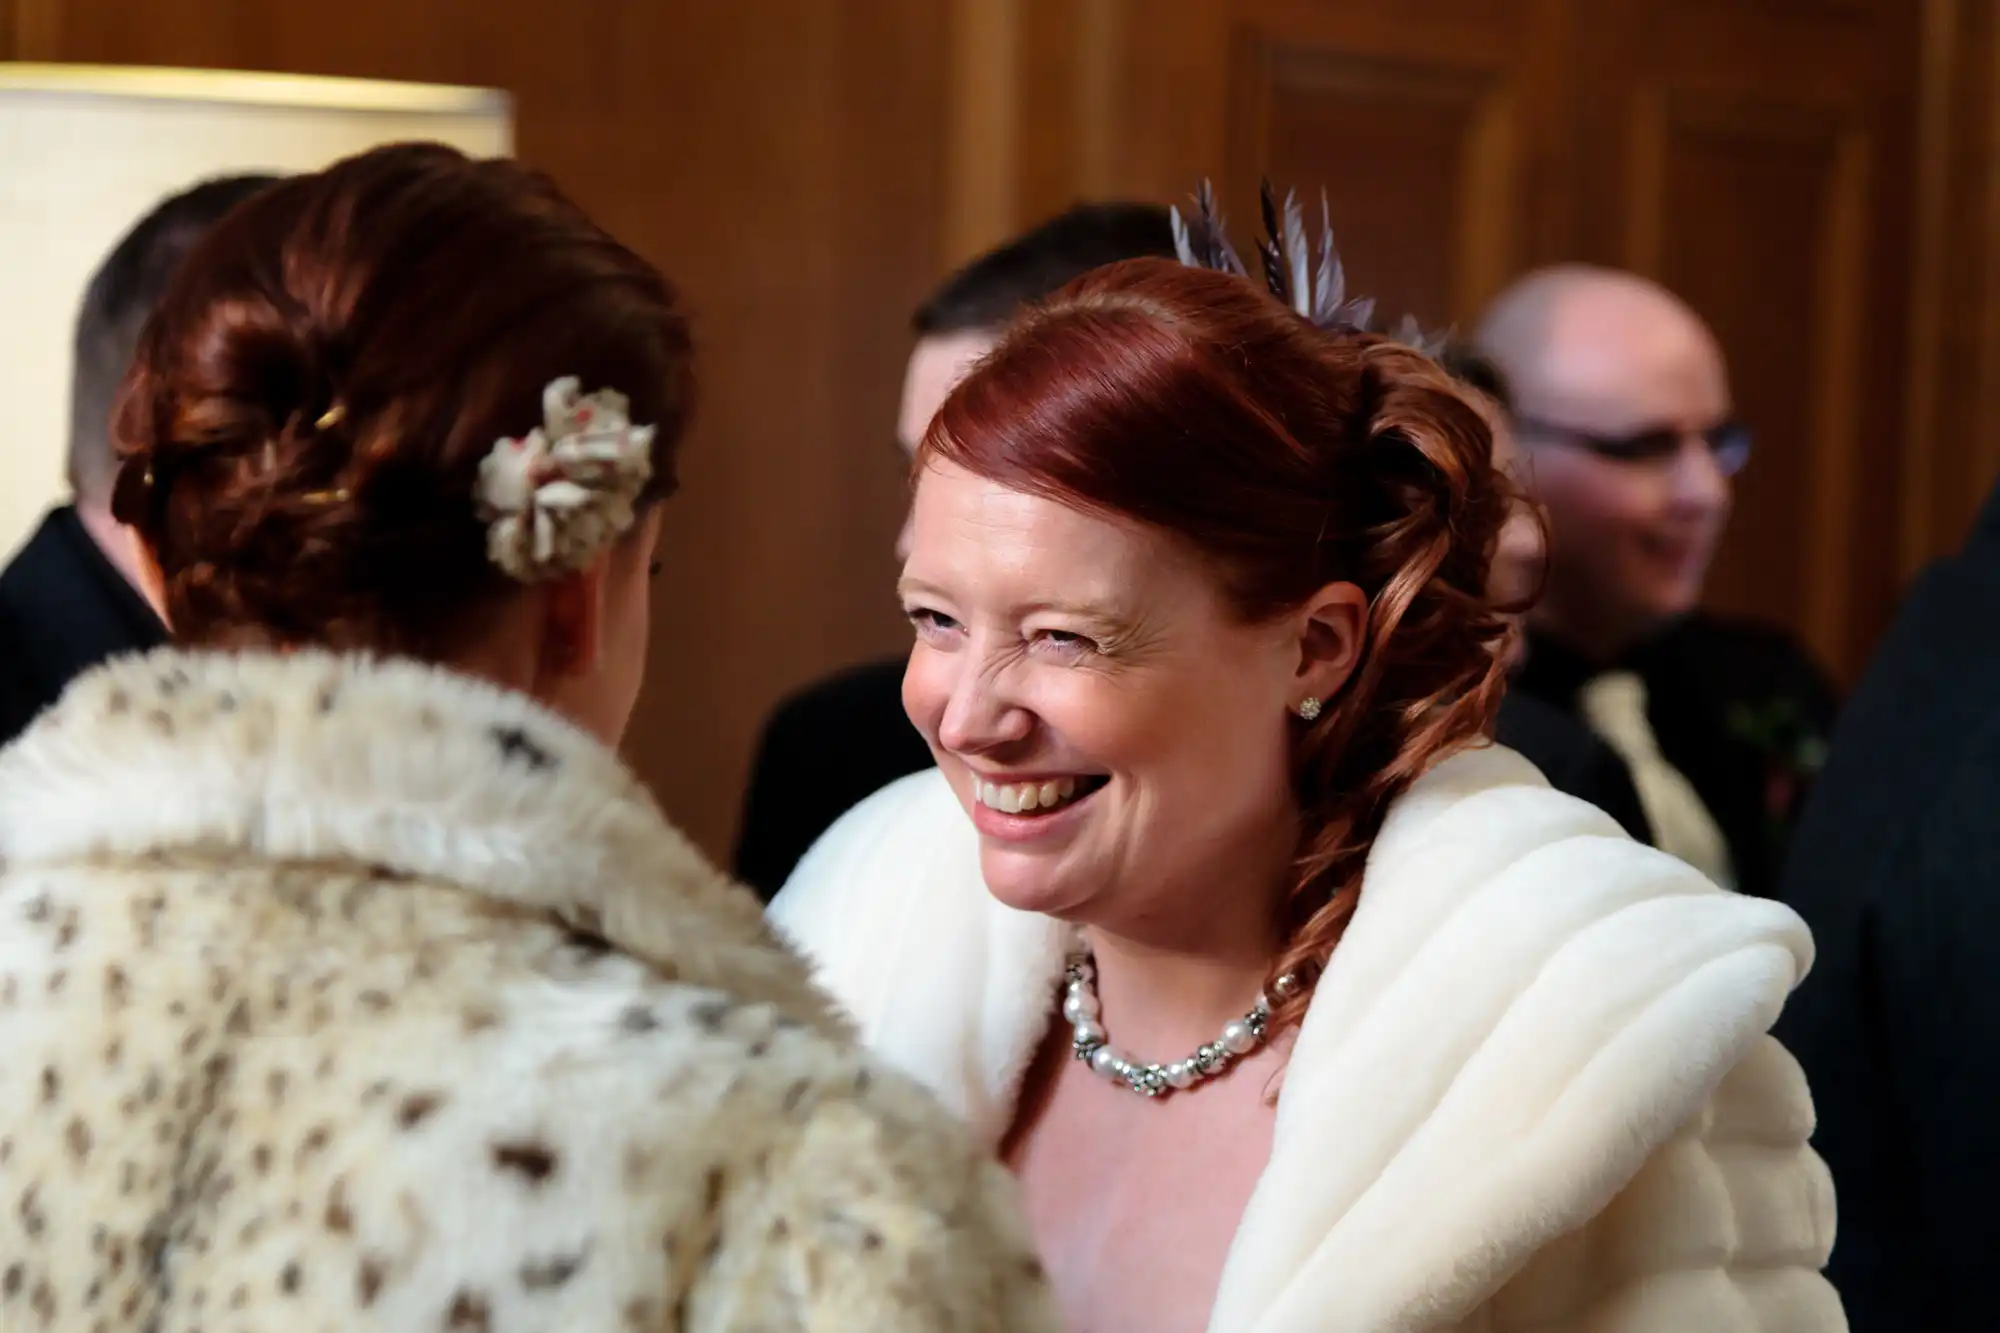 Two women sharing a joyful moment at a formal event, one wearing a white fur wrap and both with elaborate hairstyles.